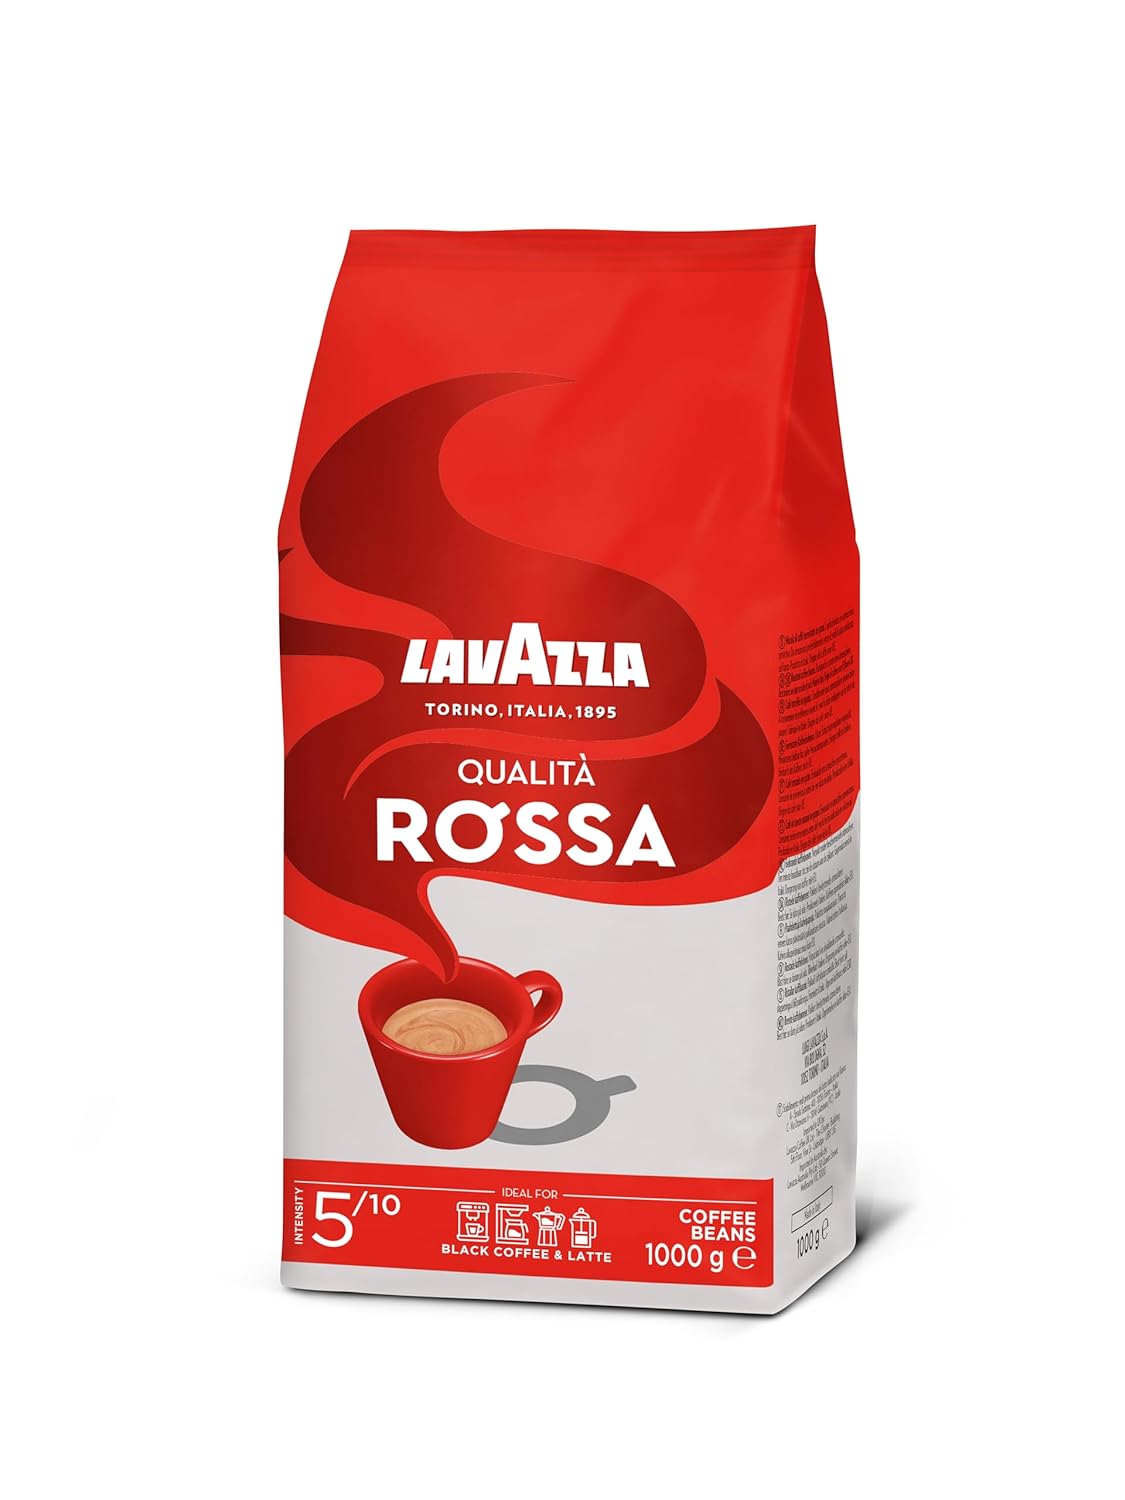 Lavazza Qualita Rossa - 2.2LB Bag of Espresso Beans - Authentic Italian, Blended and Roasted in Italy, Chocolate Flavour, Full Body and Intense Aromas